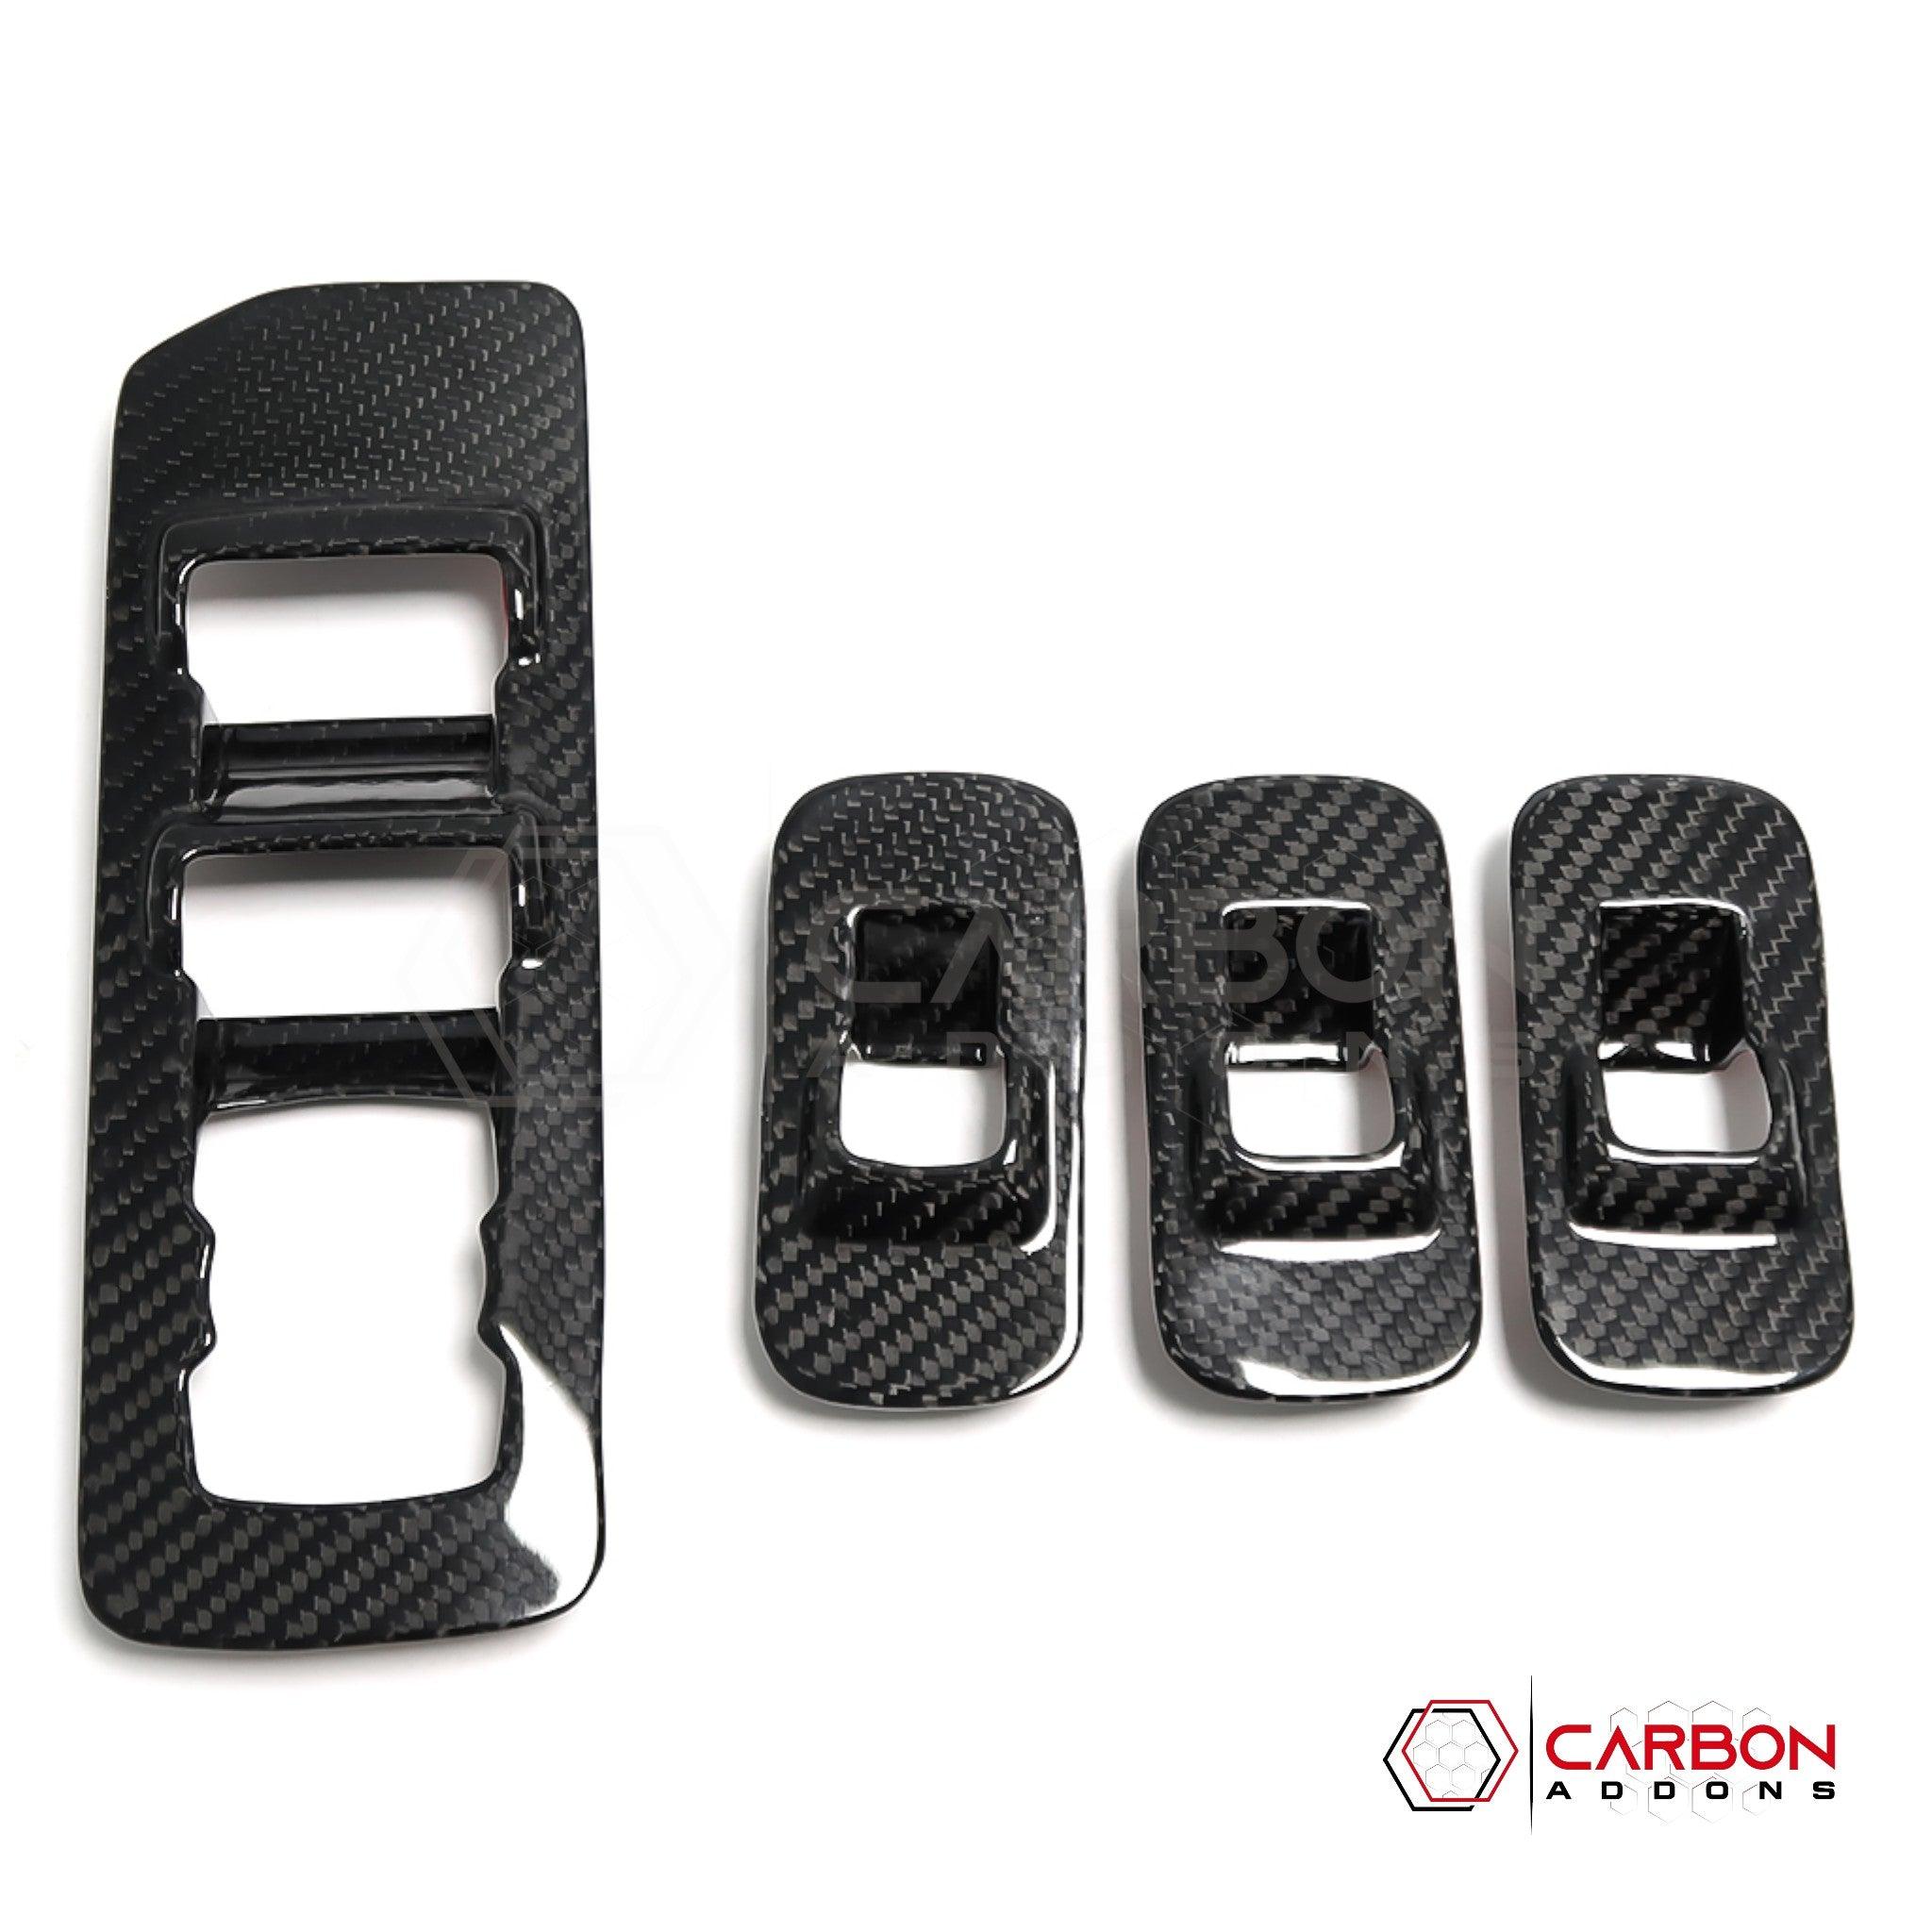 [Coming Soon] Ford F150 2015-2020 Window Switch Trim Hard Carbon Fiber Cover - carbonaddons Carbon Fiber Parts, Accessories, Upgrades, Mods